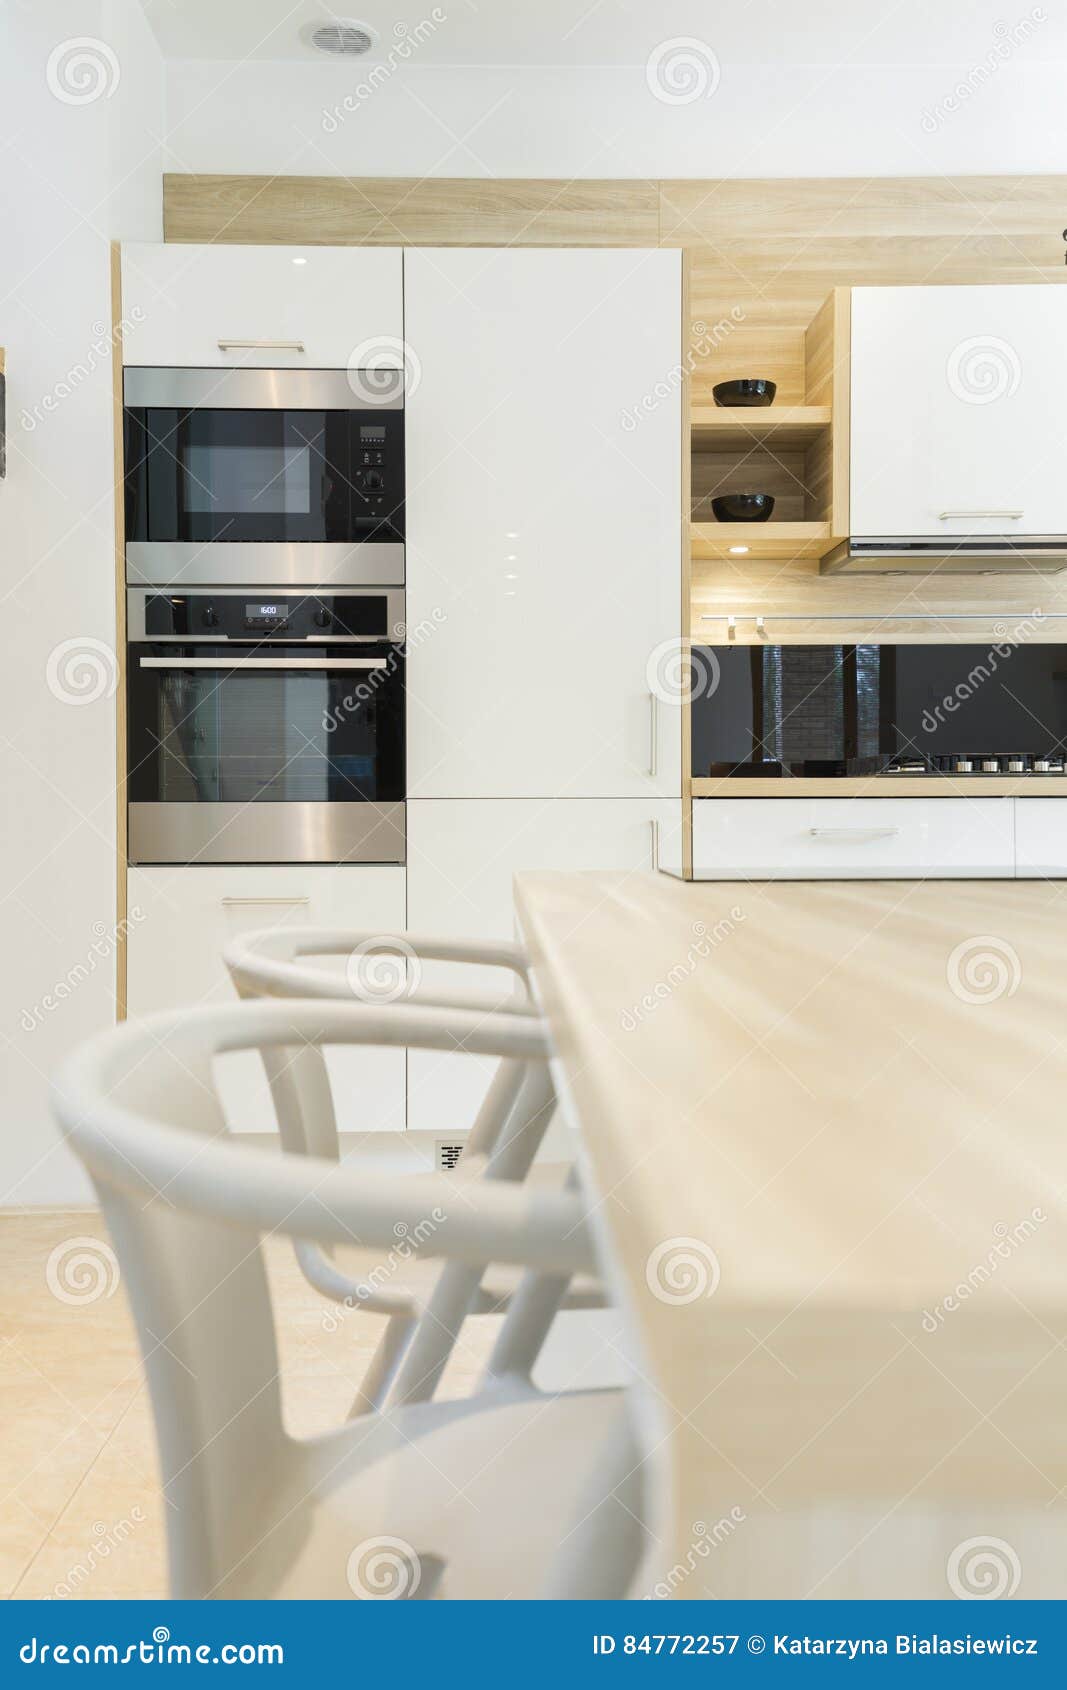 Modern Kitchen With Built In Oven Stock Image Image Of Wood